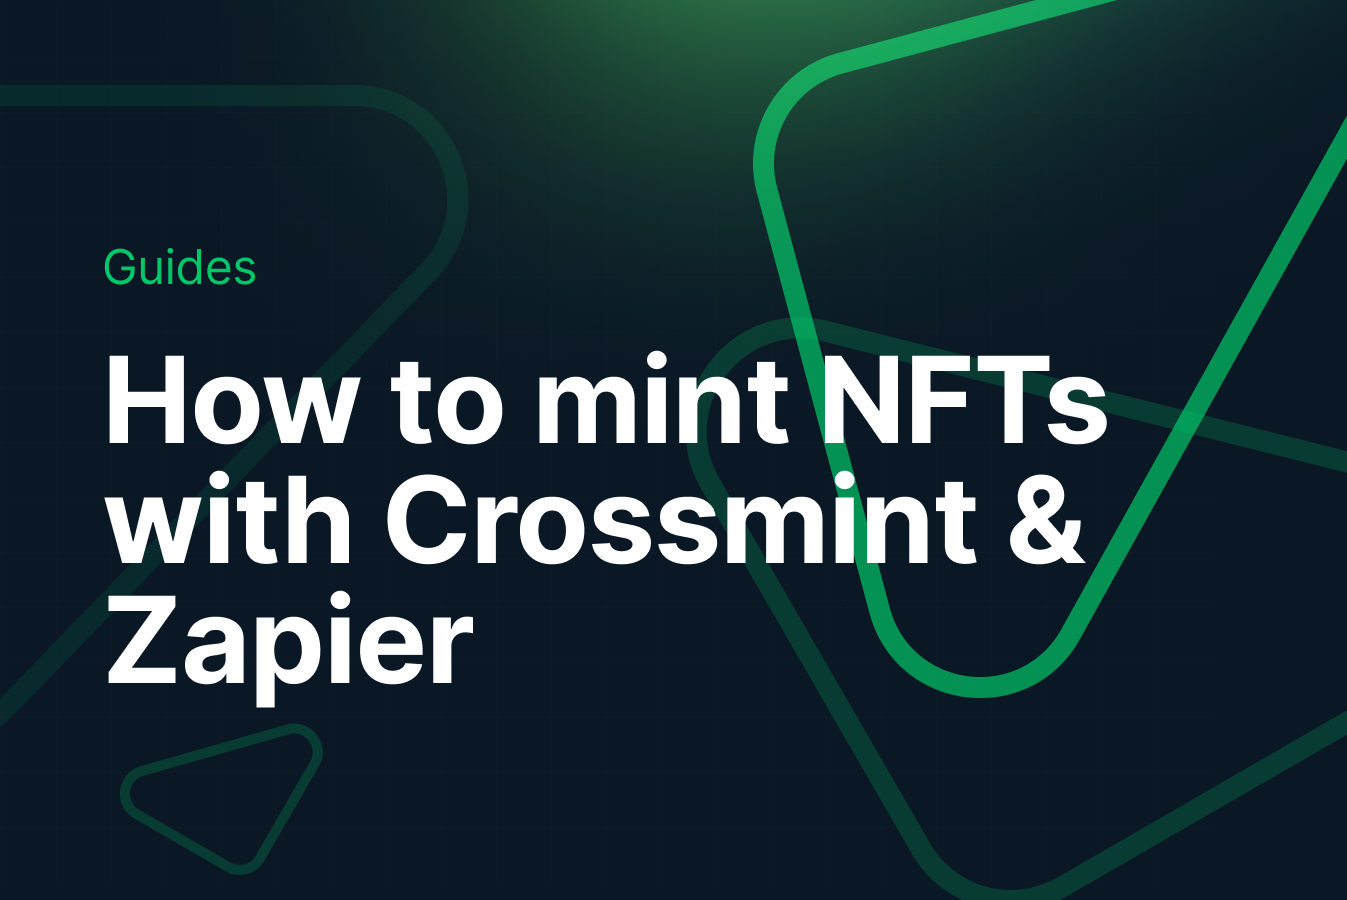 How to Mint NFTs in Seconds with Crossmint and Zapier